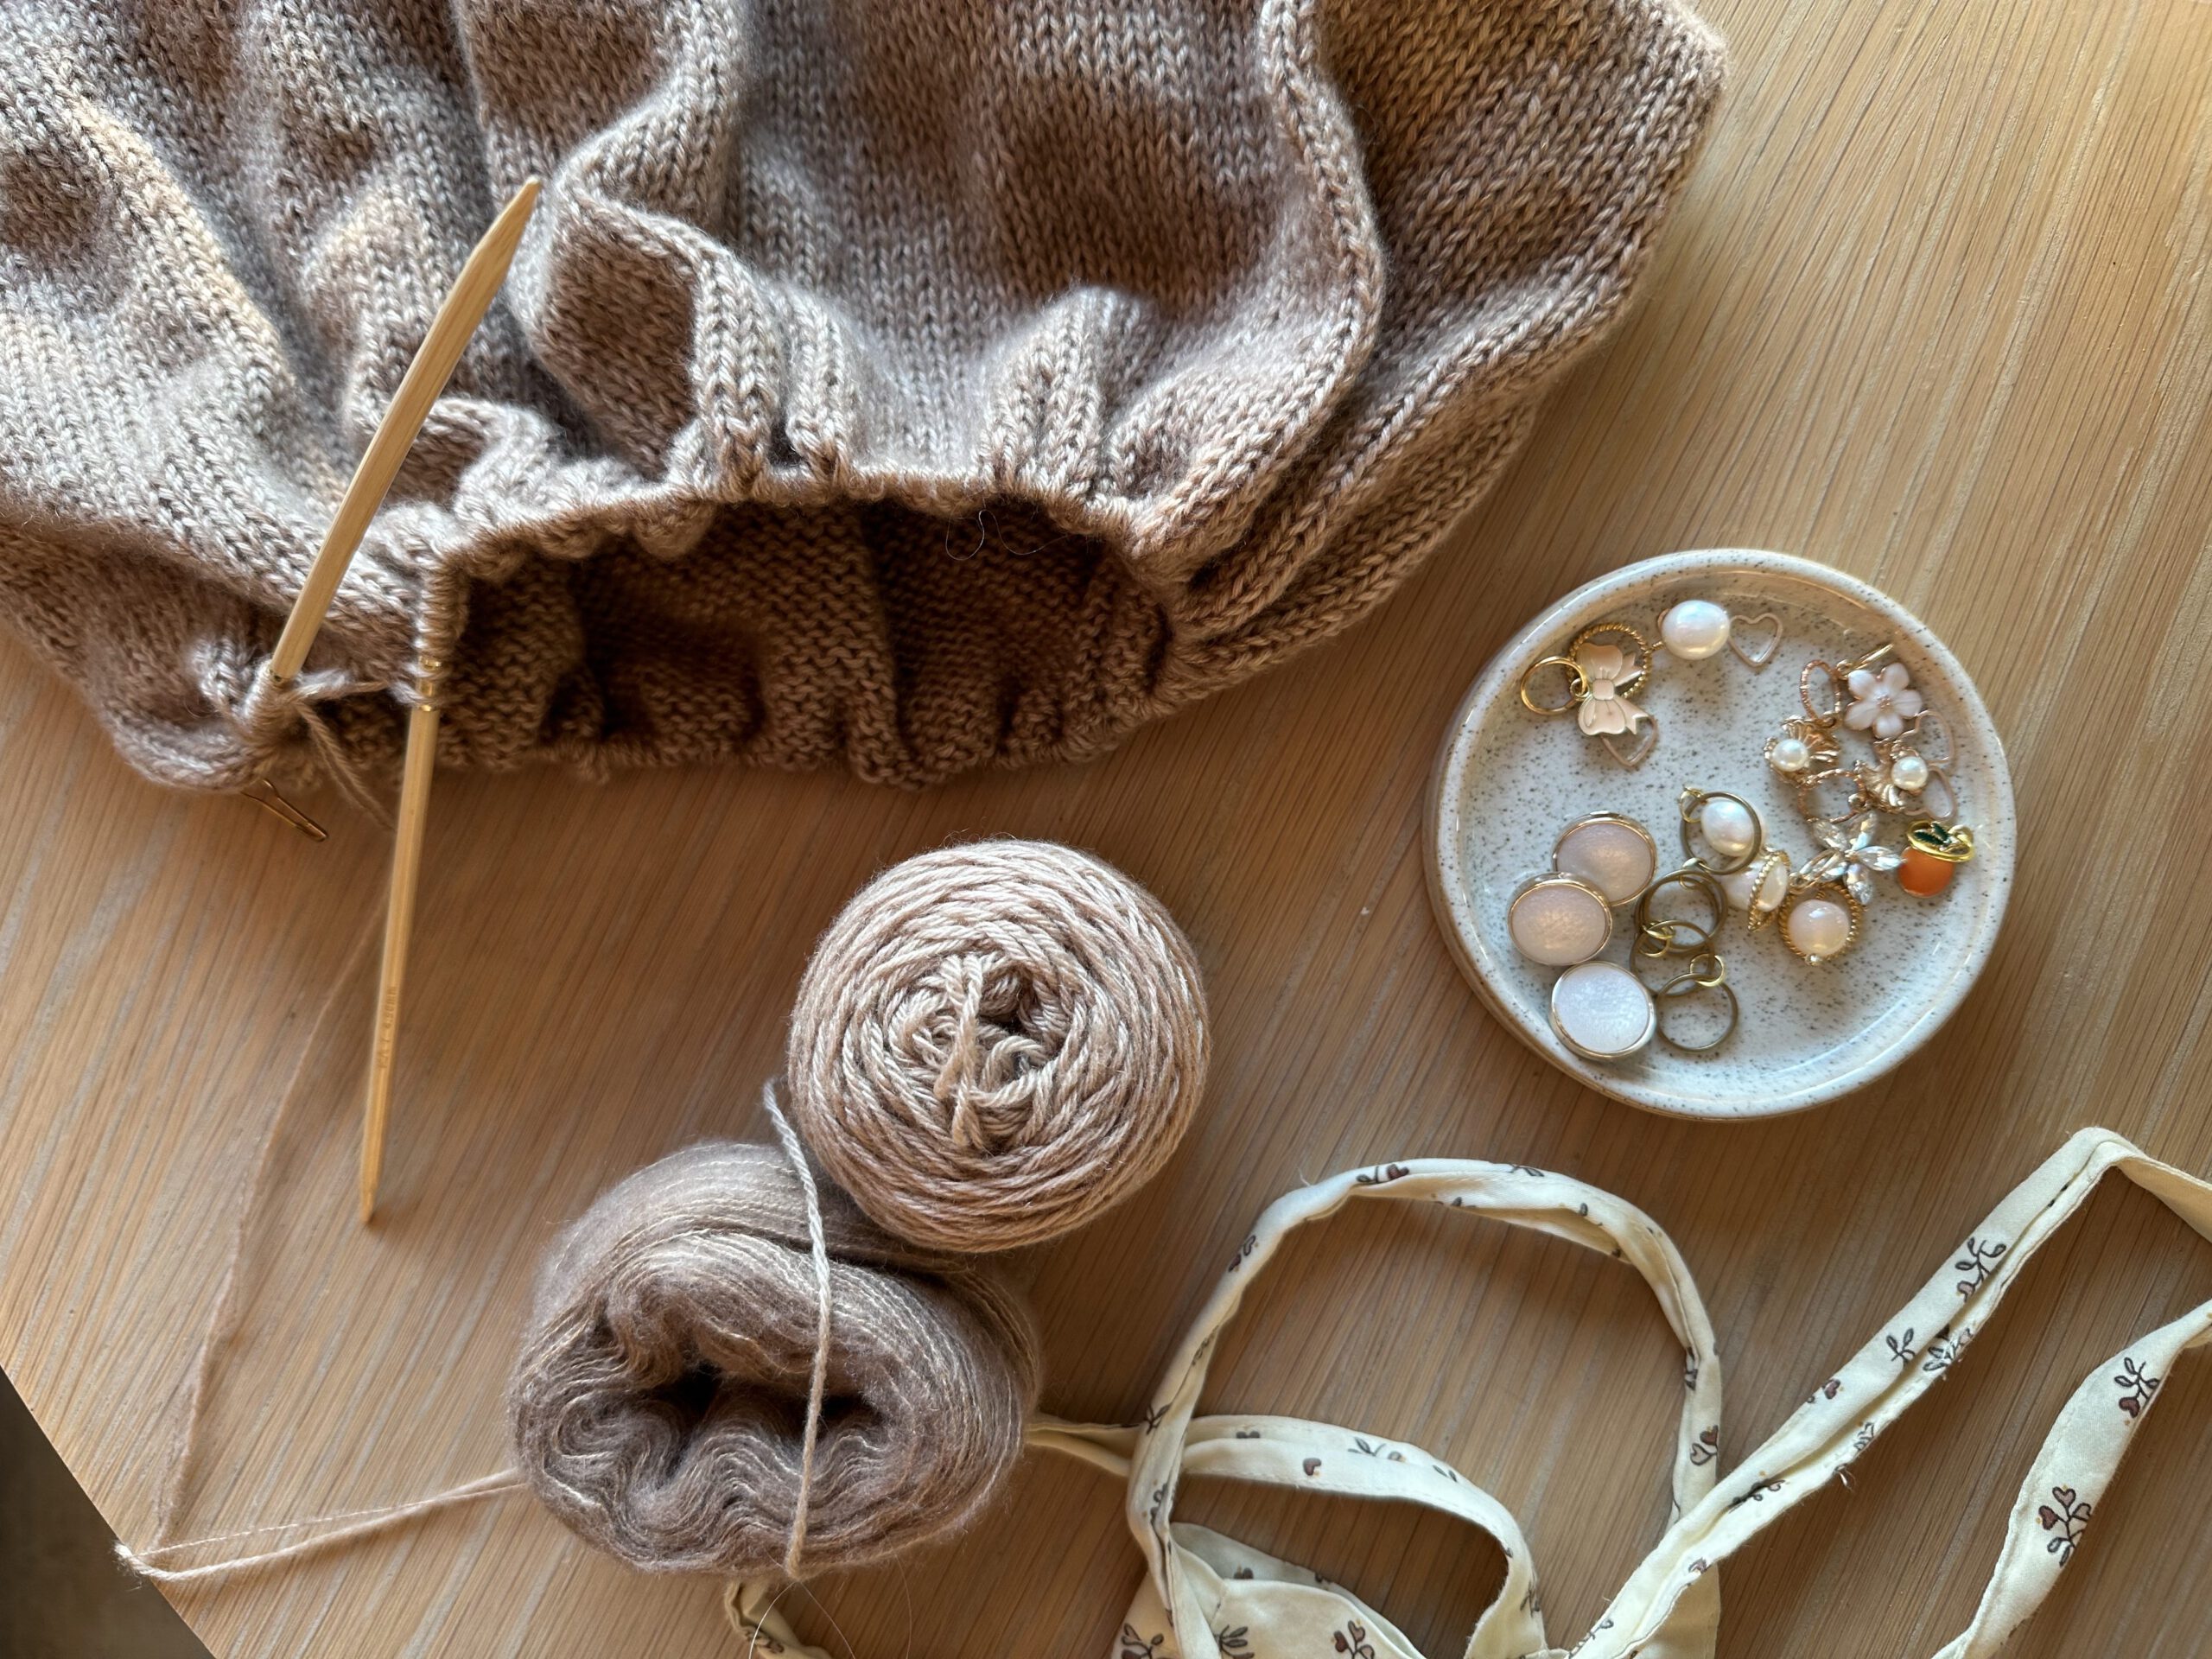 Guide to 6 easy knitting projects for beginners